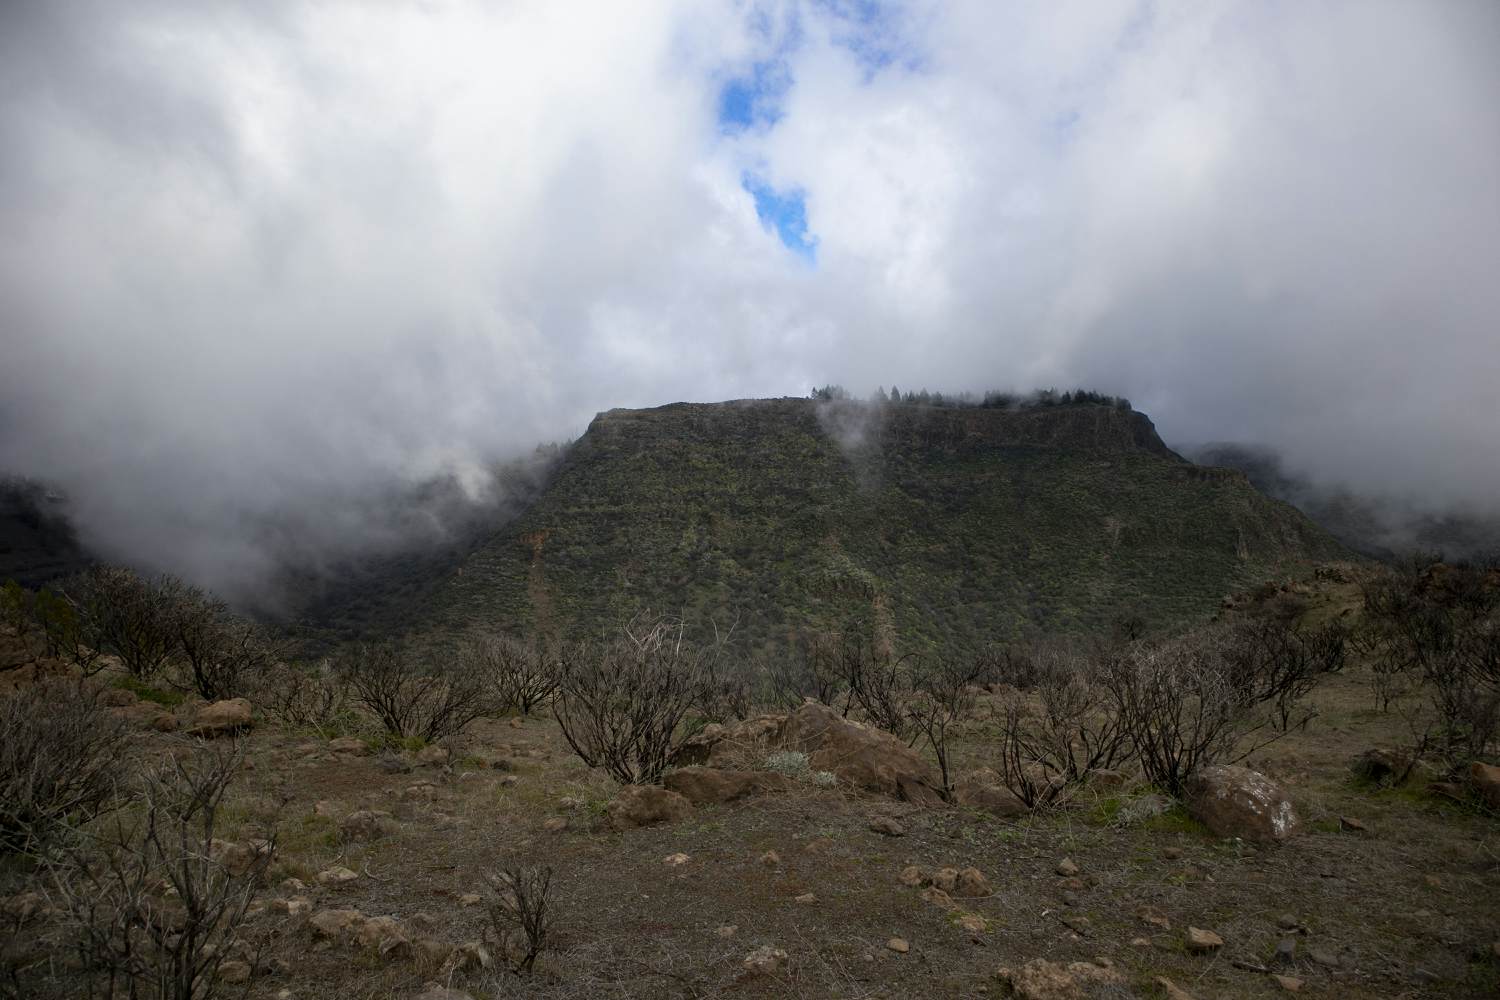 Clouds are gathering over the Barranco de Guayadeque